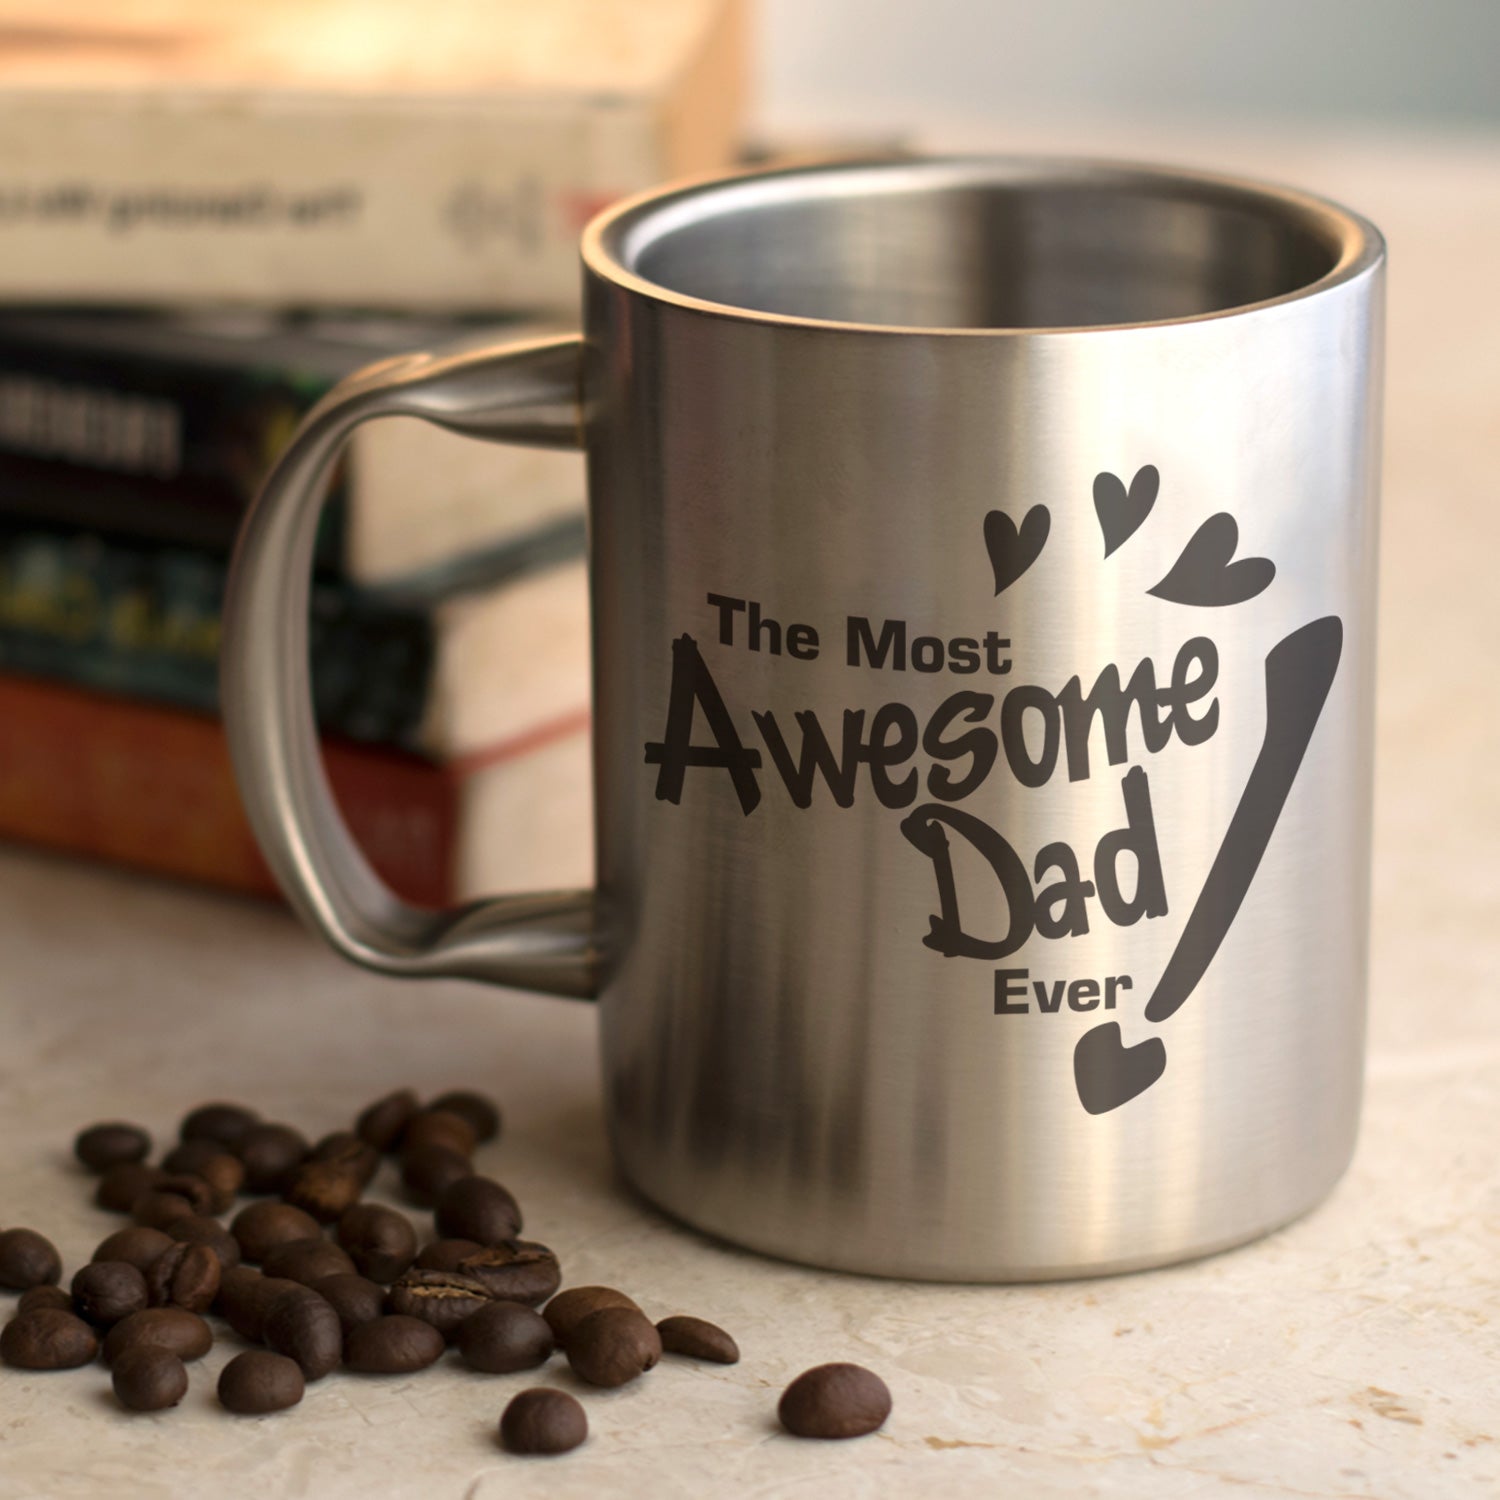 The Most Awesome Dad Mug